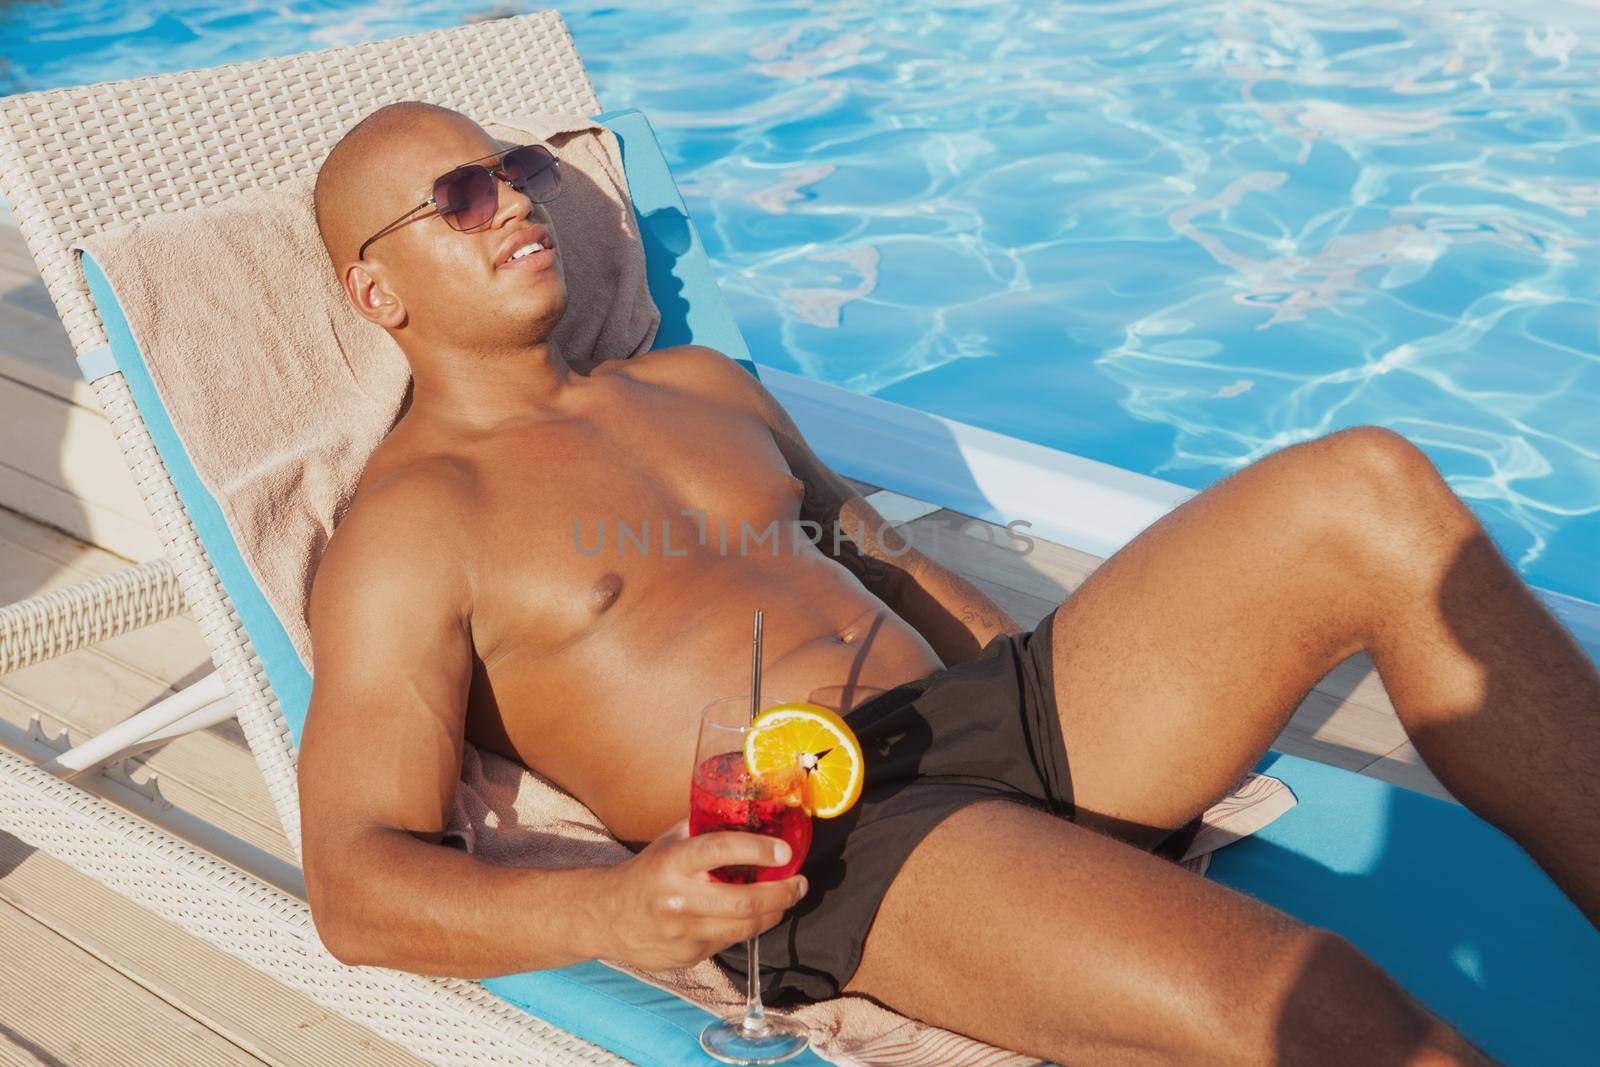 Attractive relaxed African man enjoying sunbathing, having a drink at the poolside. Handsome athletic man tanning near the swimming pool, copy space